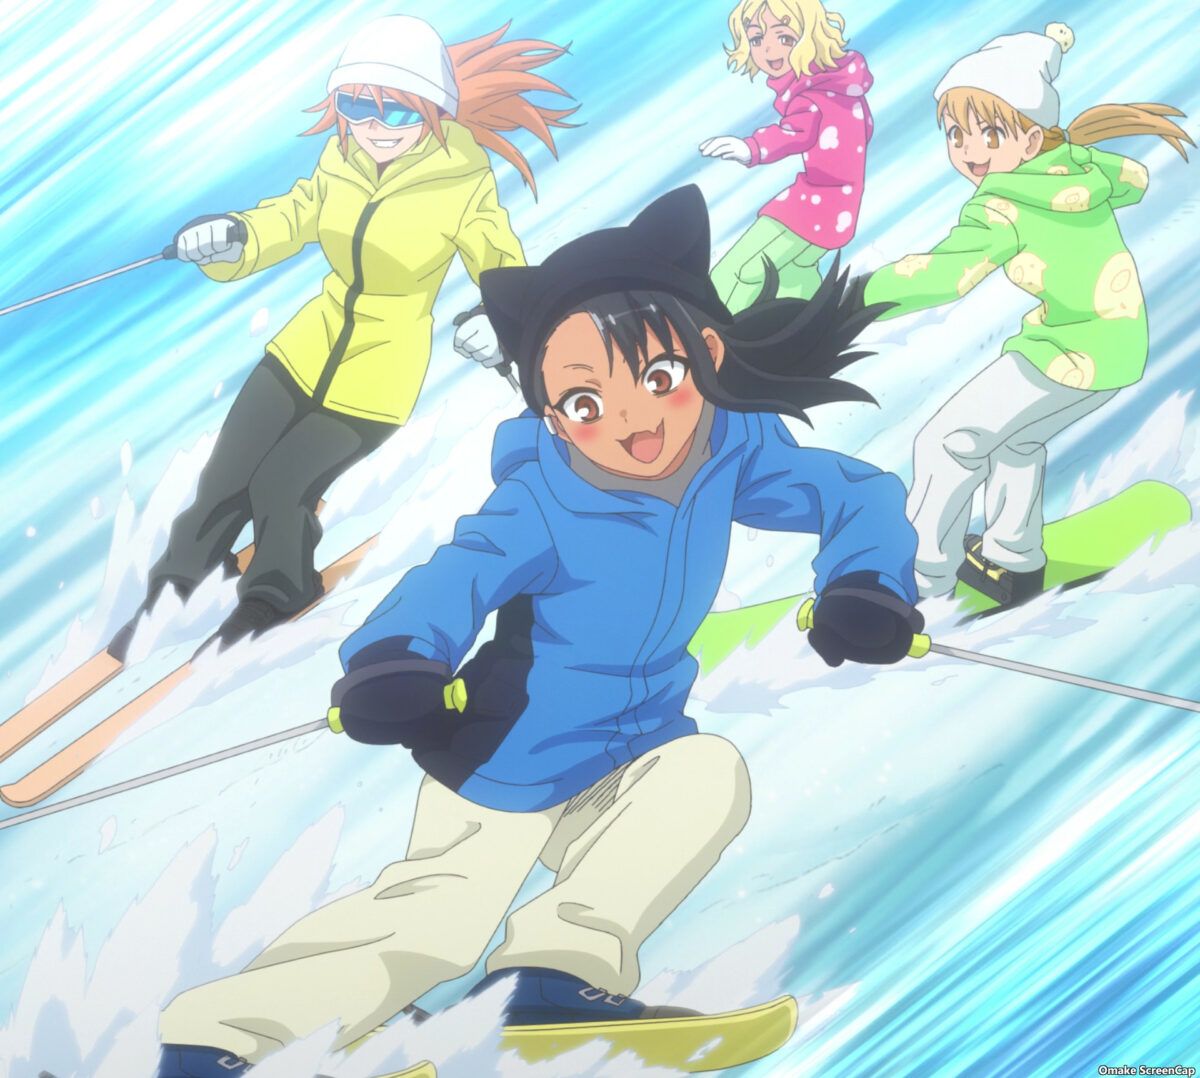 gtthere will never be a skiing anime gtthere will never  108267785  added by powneriffic at Anime  Manga  dubbed anime shows anime games  anime art mango